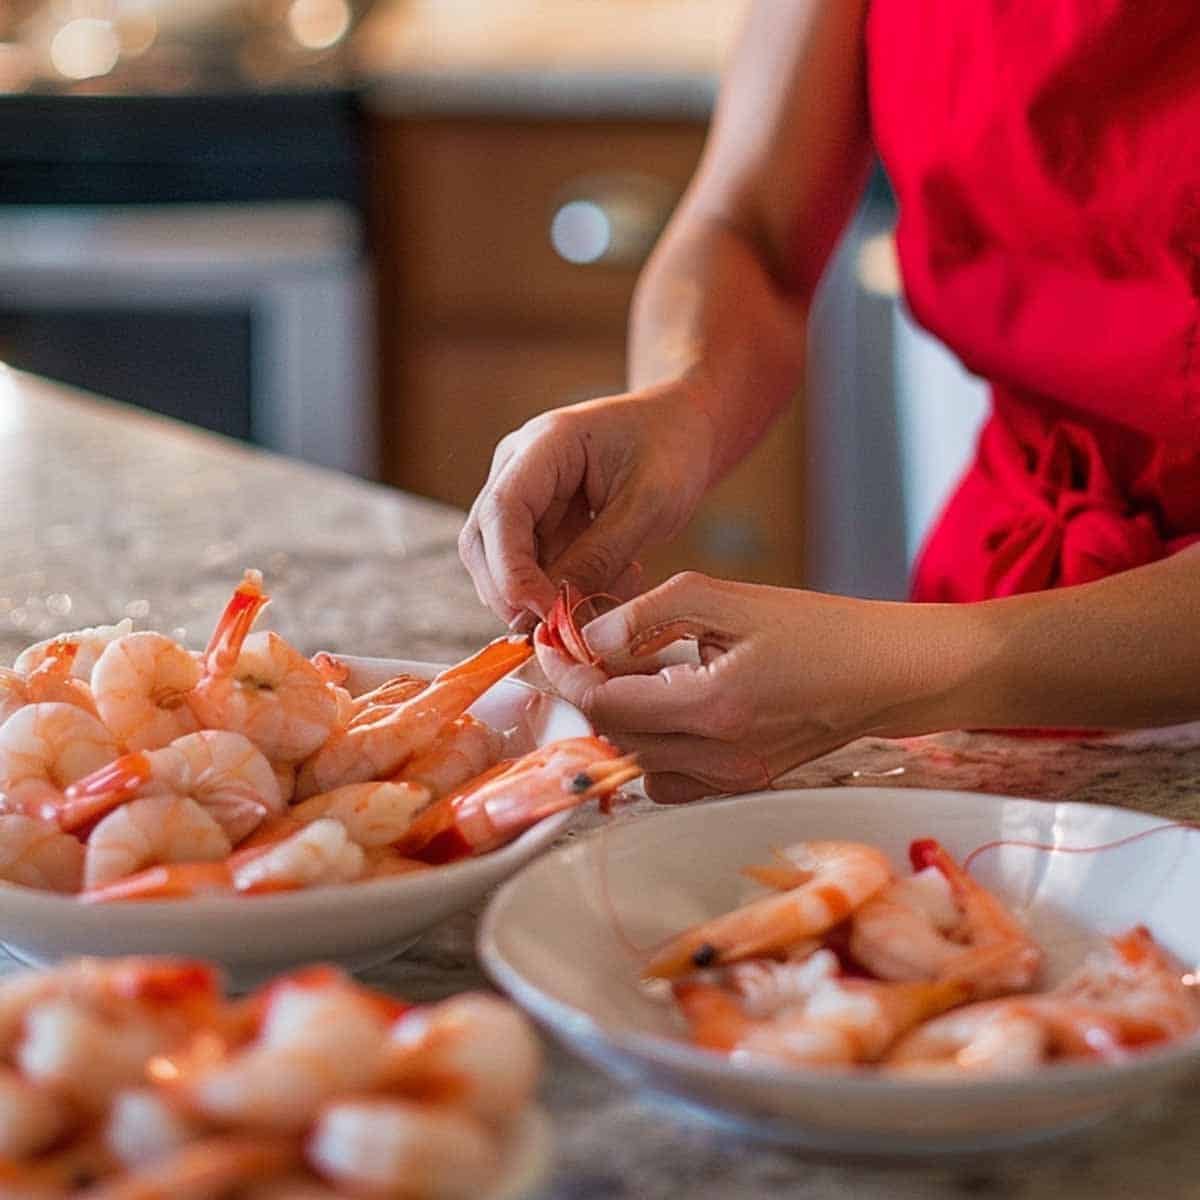 Woman peeling and deveining shrimp on a kitchen counter, with tools and bowl visible